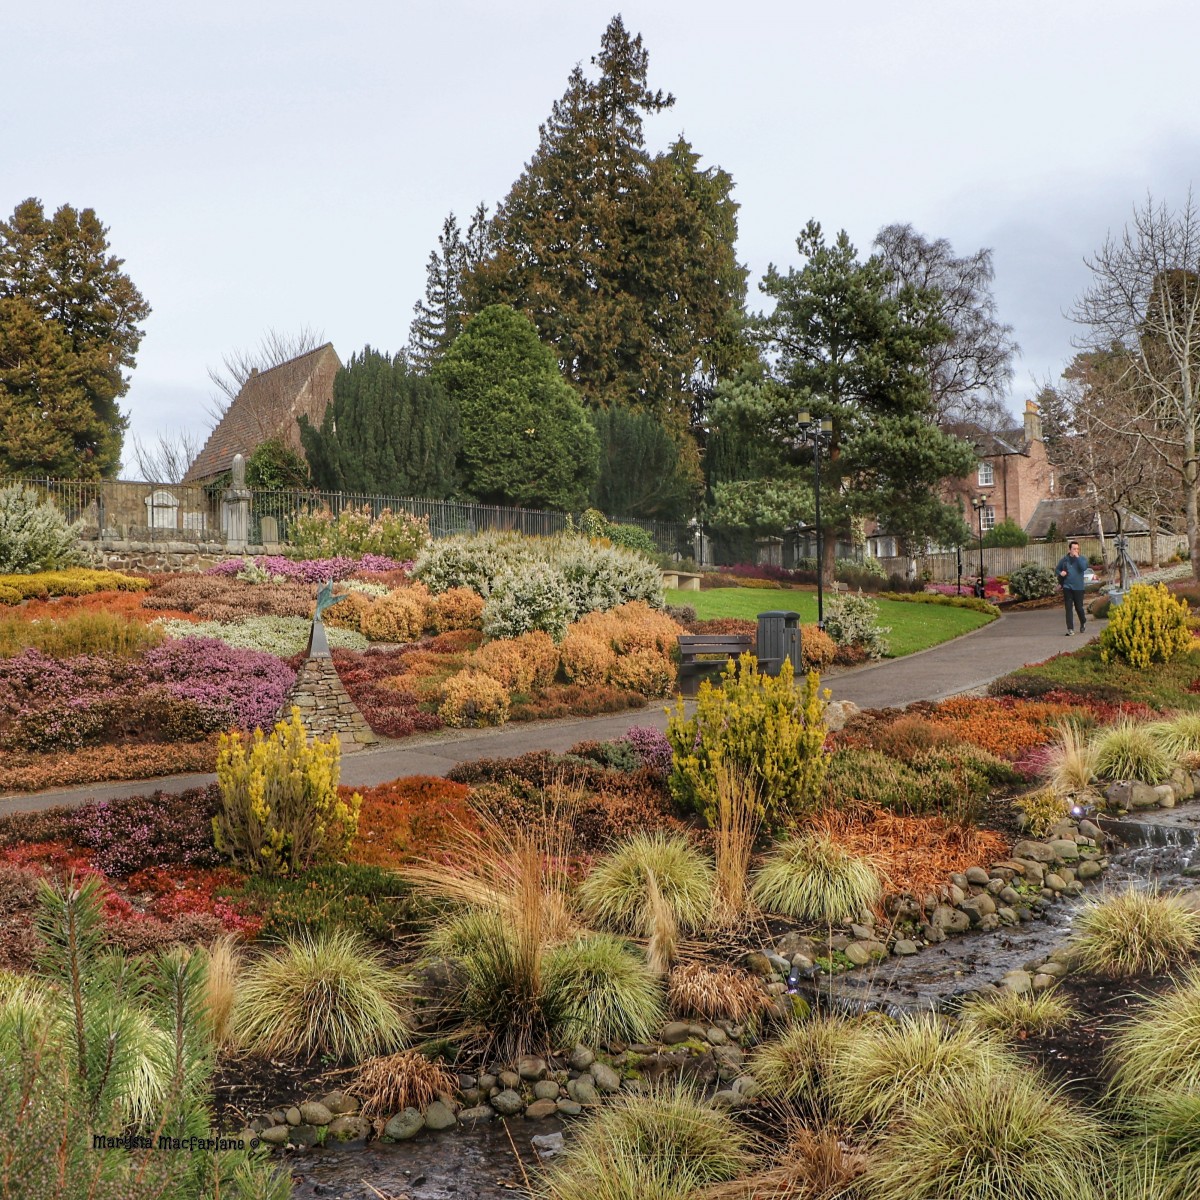 A beautiful palette of colours from trees and shrubs in Rodney gardens in Perth city centre.